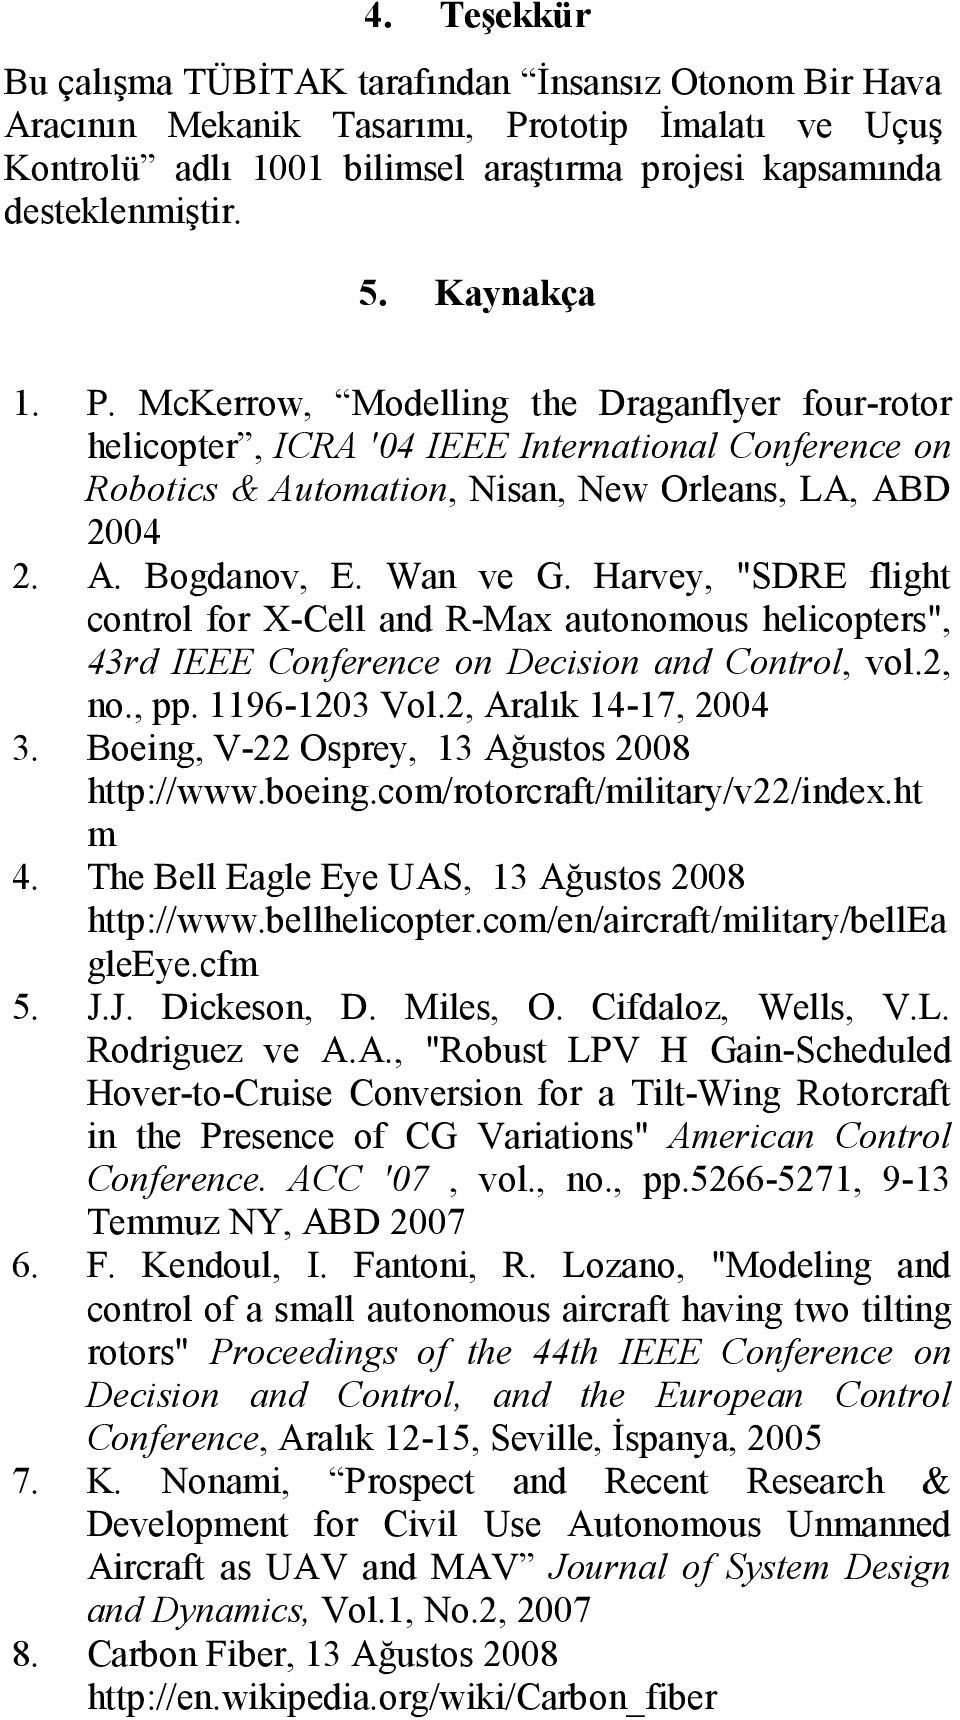 Harvey, "SDRE flight control for X-Cell and R-Max autonomous helicopters", 43rd IEEE Conference on Decision and Control, vol.2, no., pp. 1196-1203 Vol.2, Aralık 14-17, 2004 3.